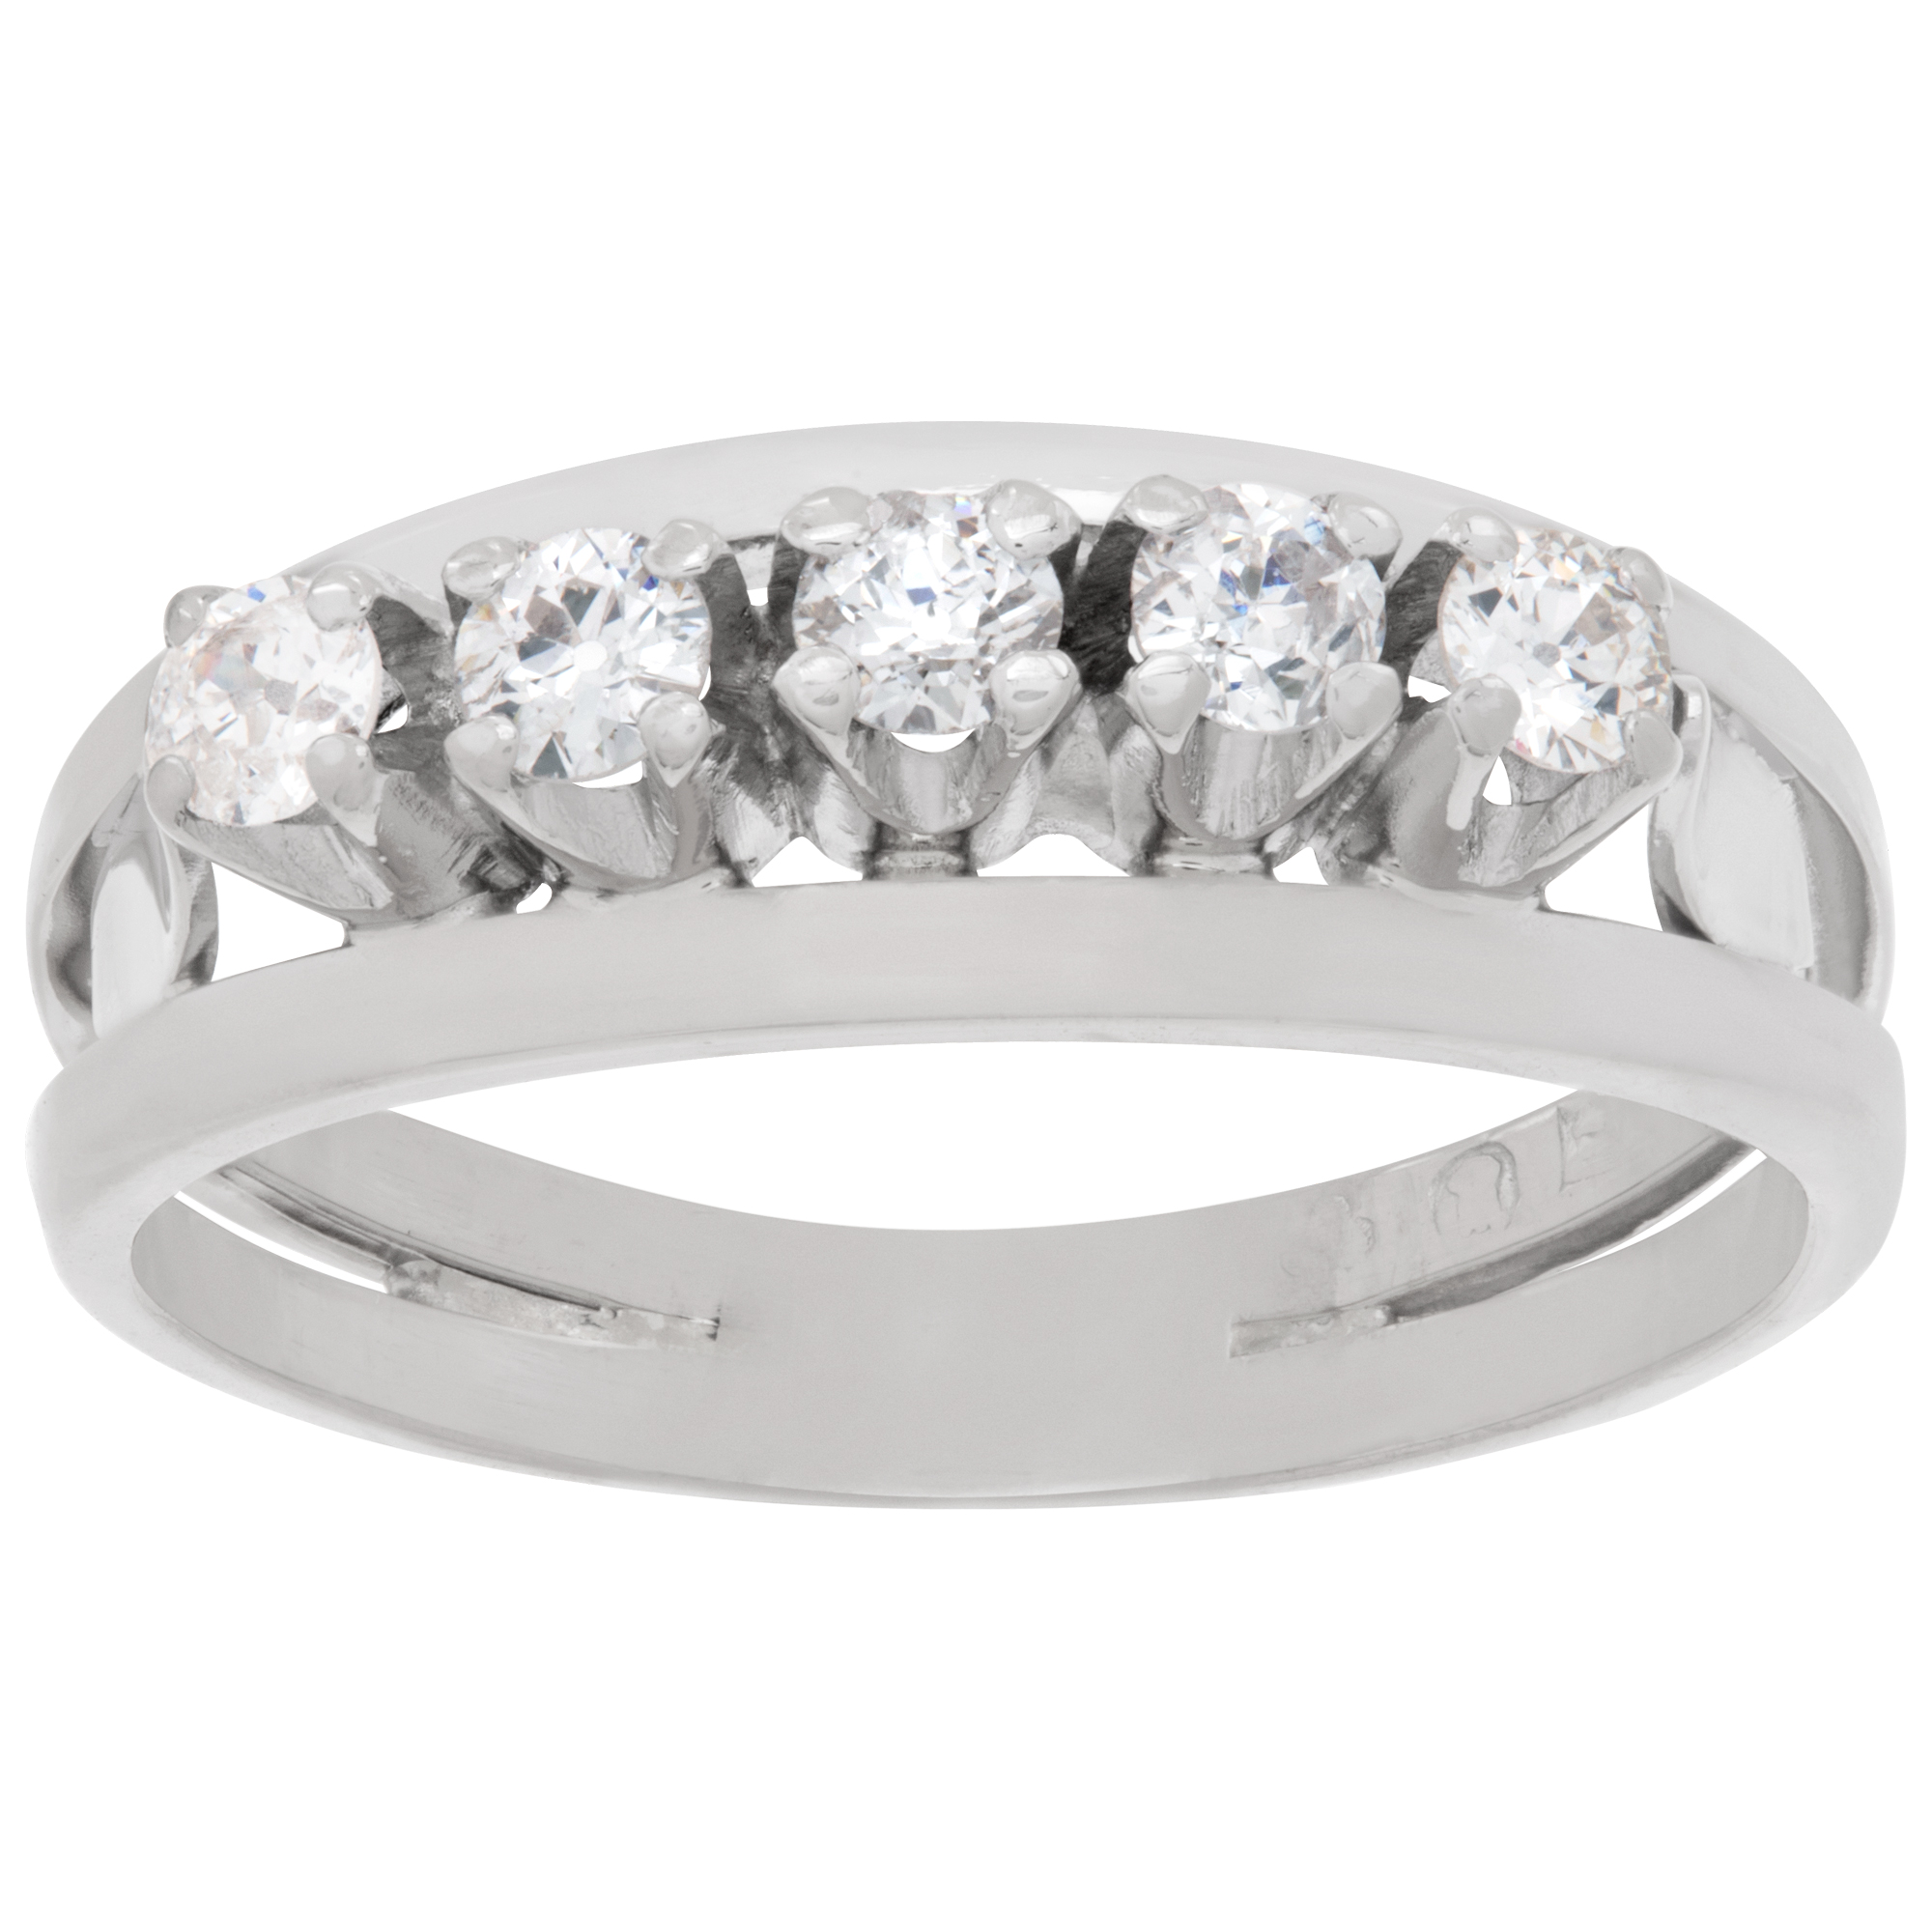 Diamond band with 5 diamonds in 18k white gold. Size 7